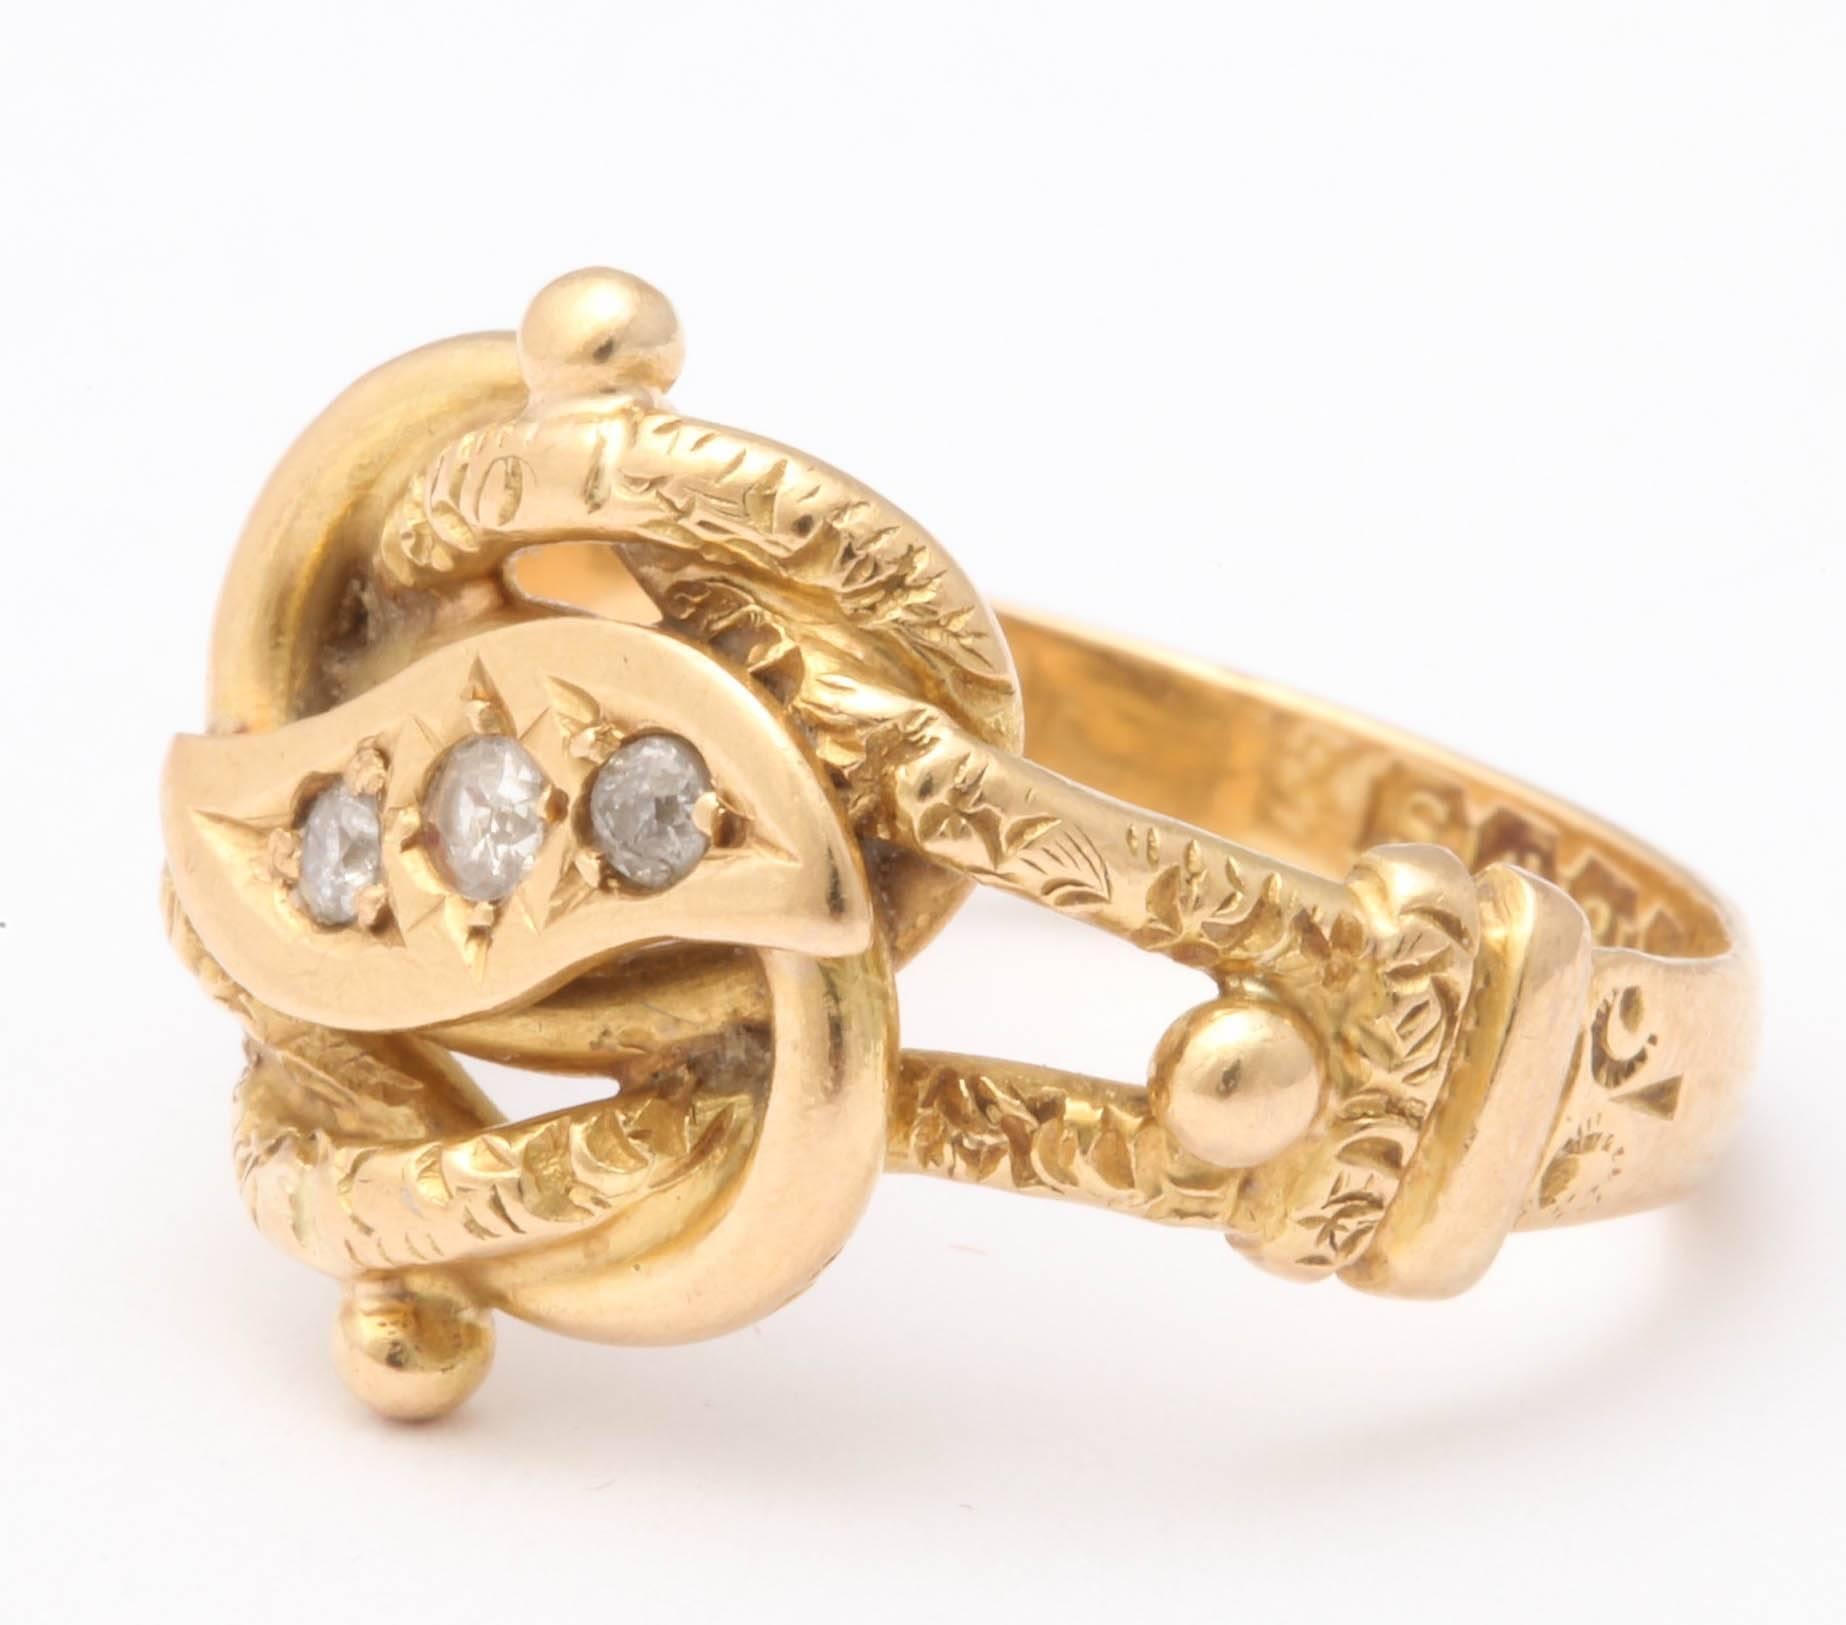 Victorian 18ct Gold Chased Lovers Knot Ring, Set with 3 old cut diamonds, Hallmarks for Birmingham 1867